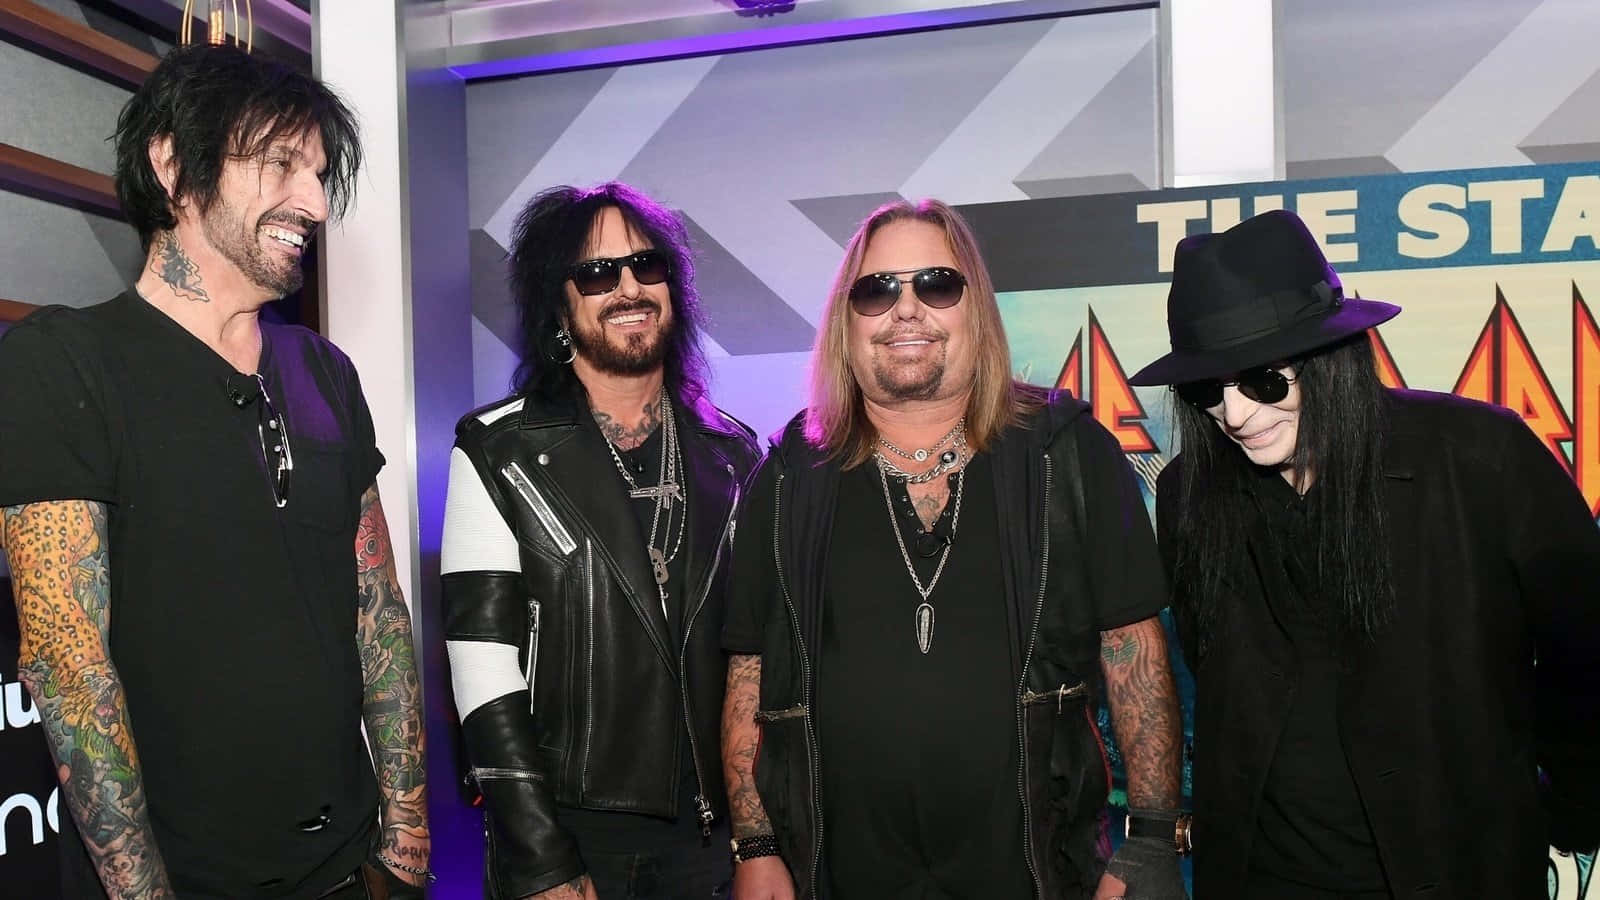 Motley Crue rocks their fans with an unforgettable performance Wallpaper